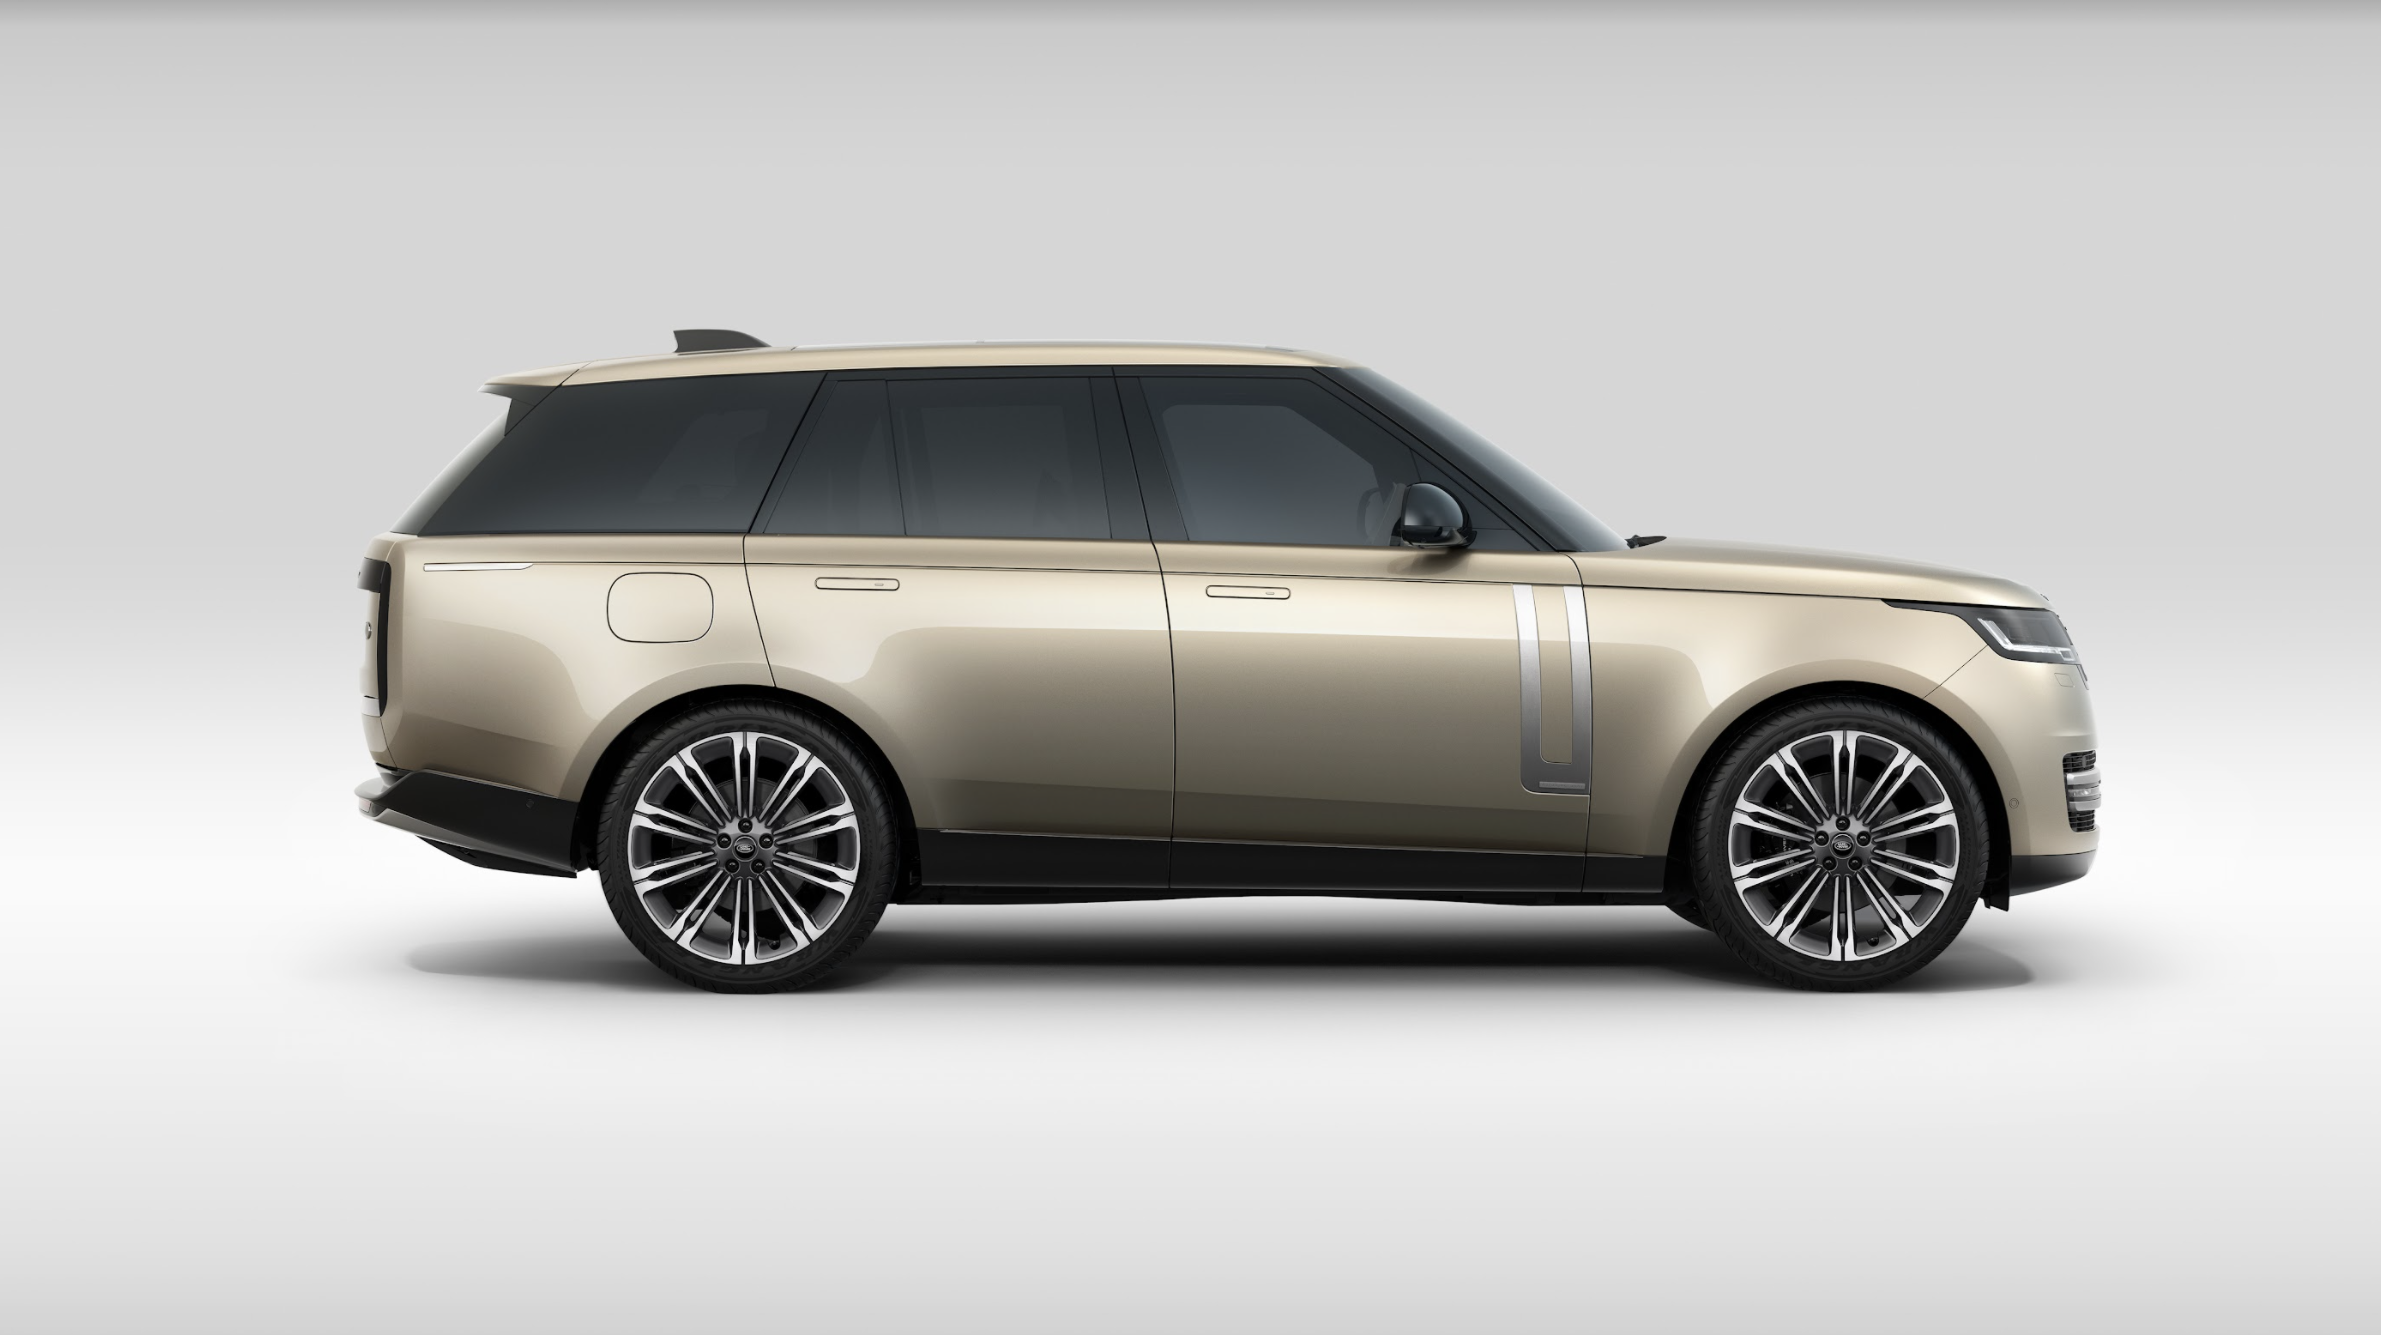 LAND ROVER OPENS BOOKINGS FOR NEW RANGE ROVER IN INDIA